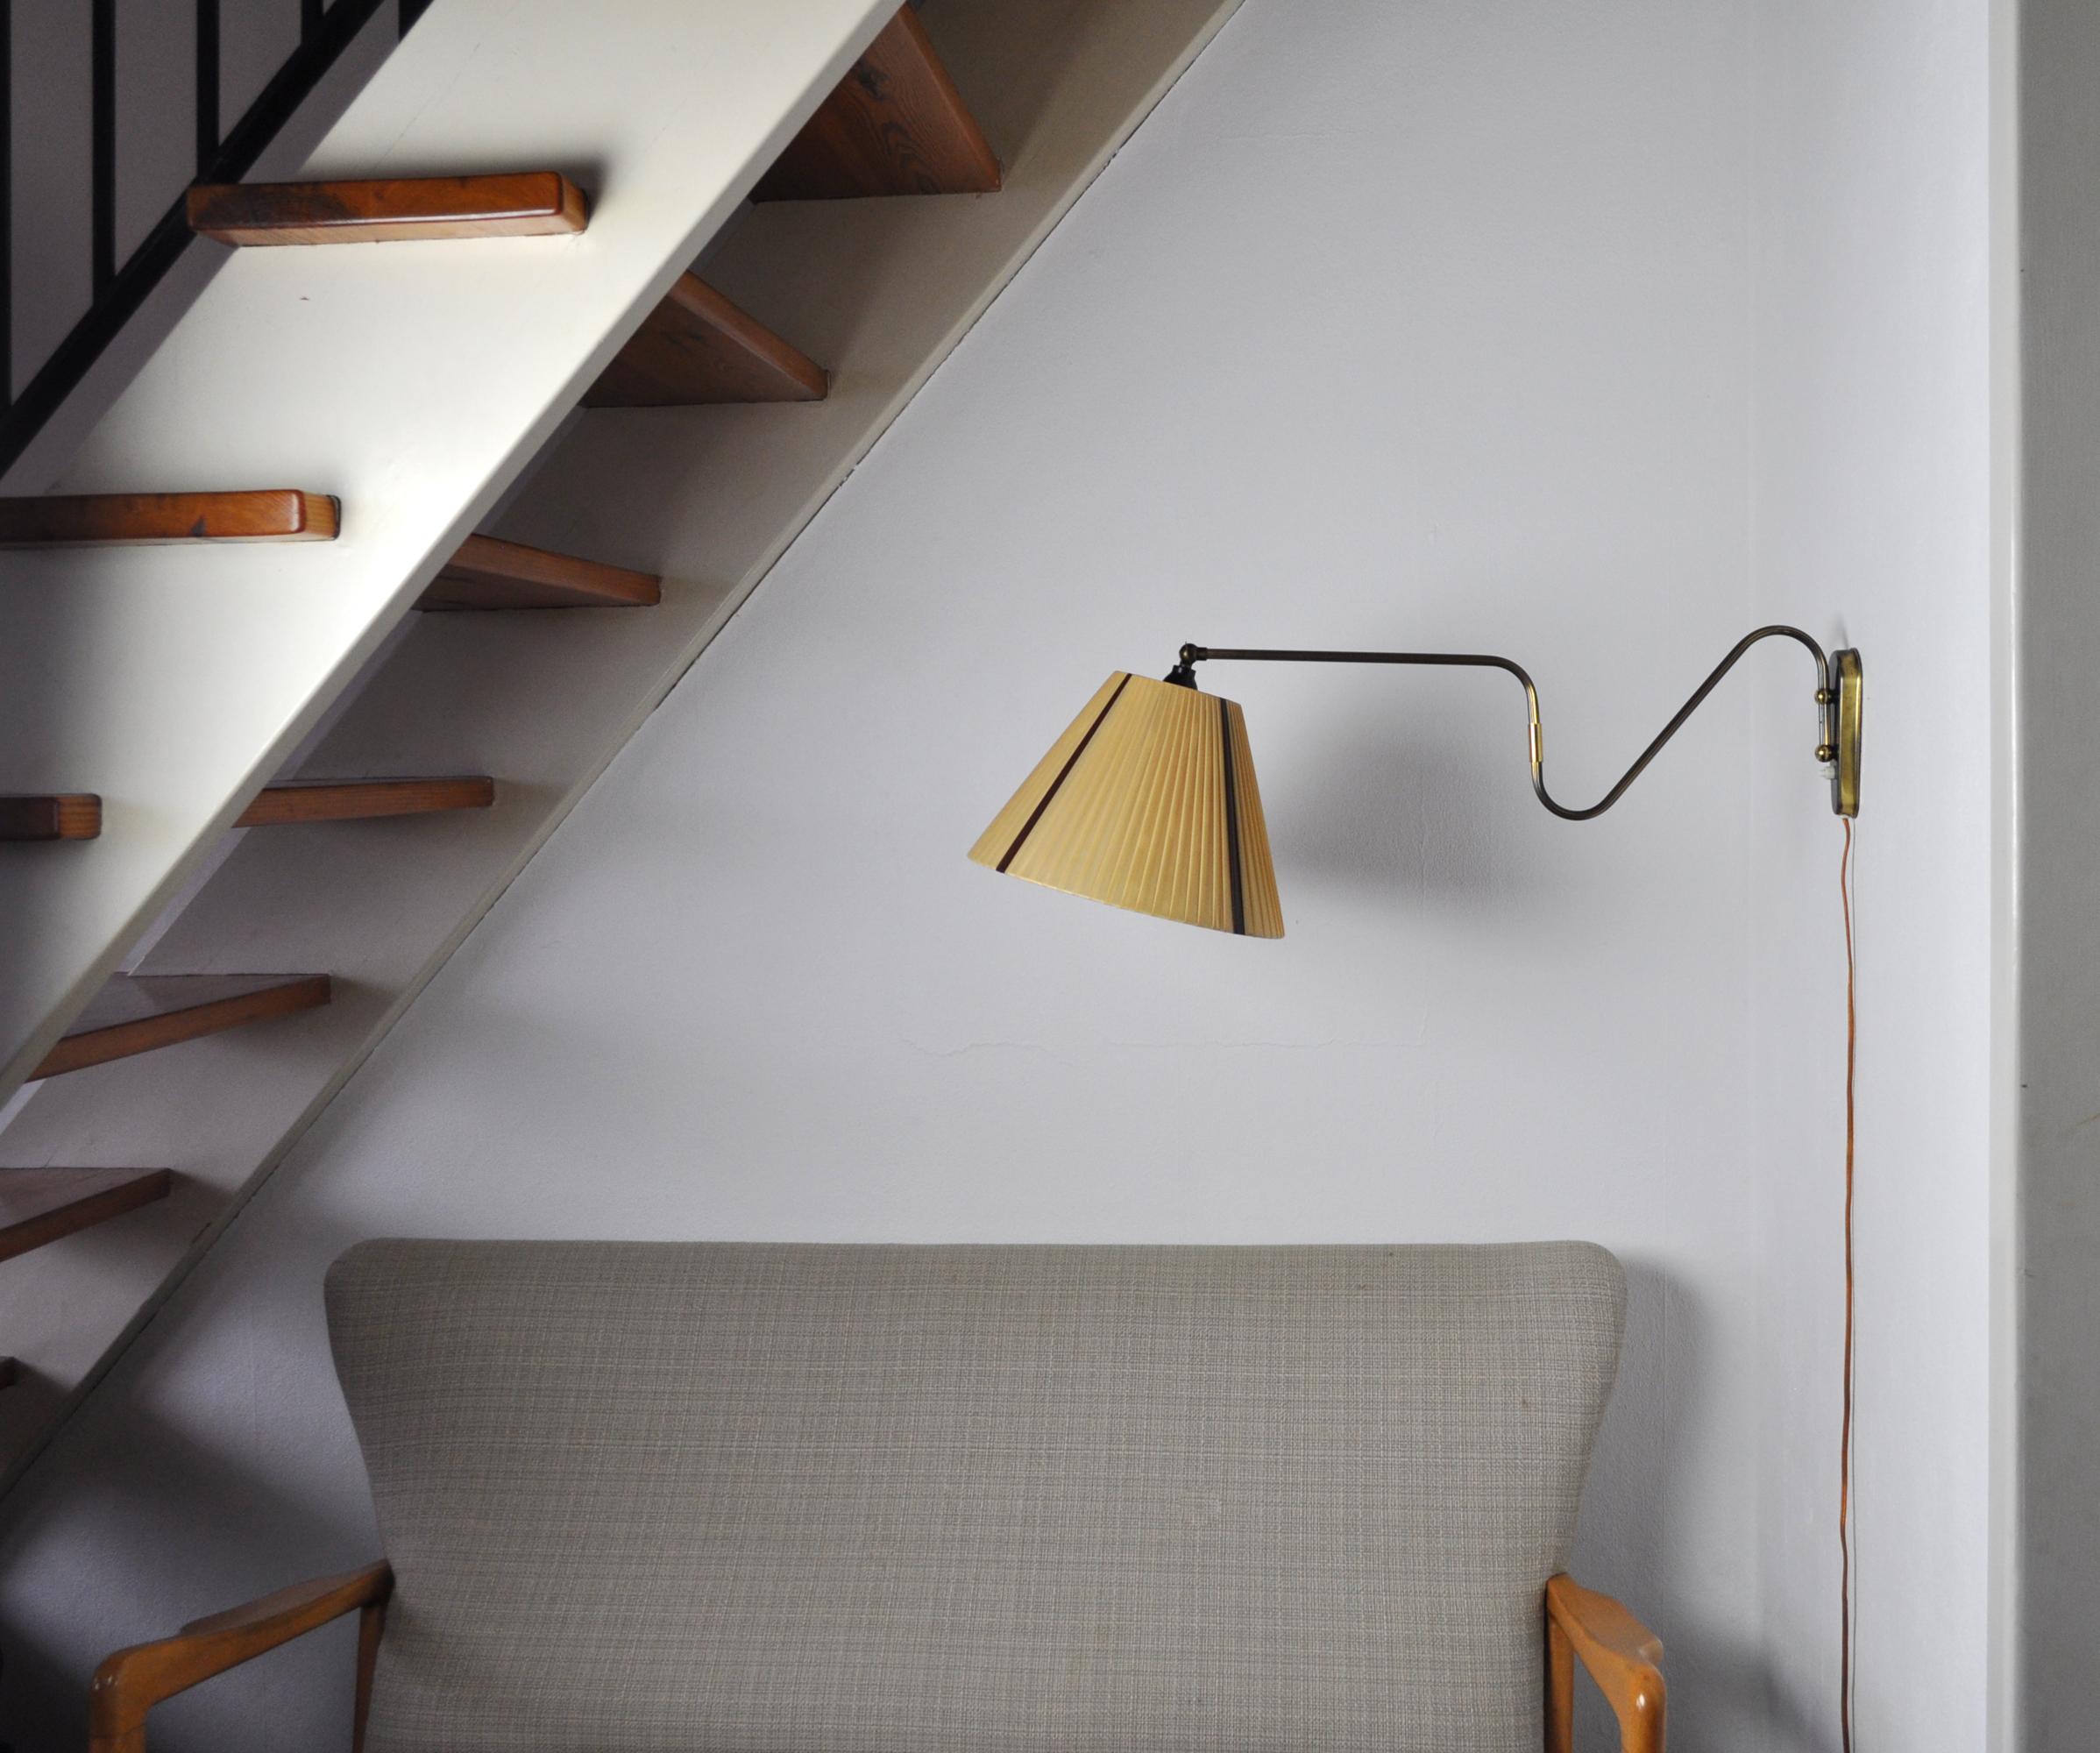 Brass wall lamp with two-piece swing arm and adjustable head.
Swivel and wall mount made in brass, mounted with original shade in mustard color and four brown stripes. 
Probably made by Lyfa, imprinted on the plug.

Measures: Arm length incl.